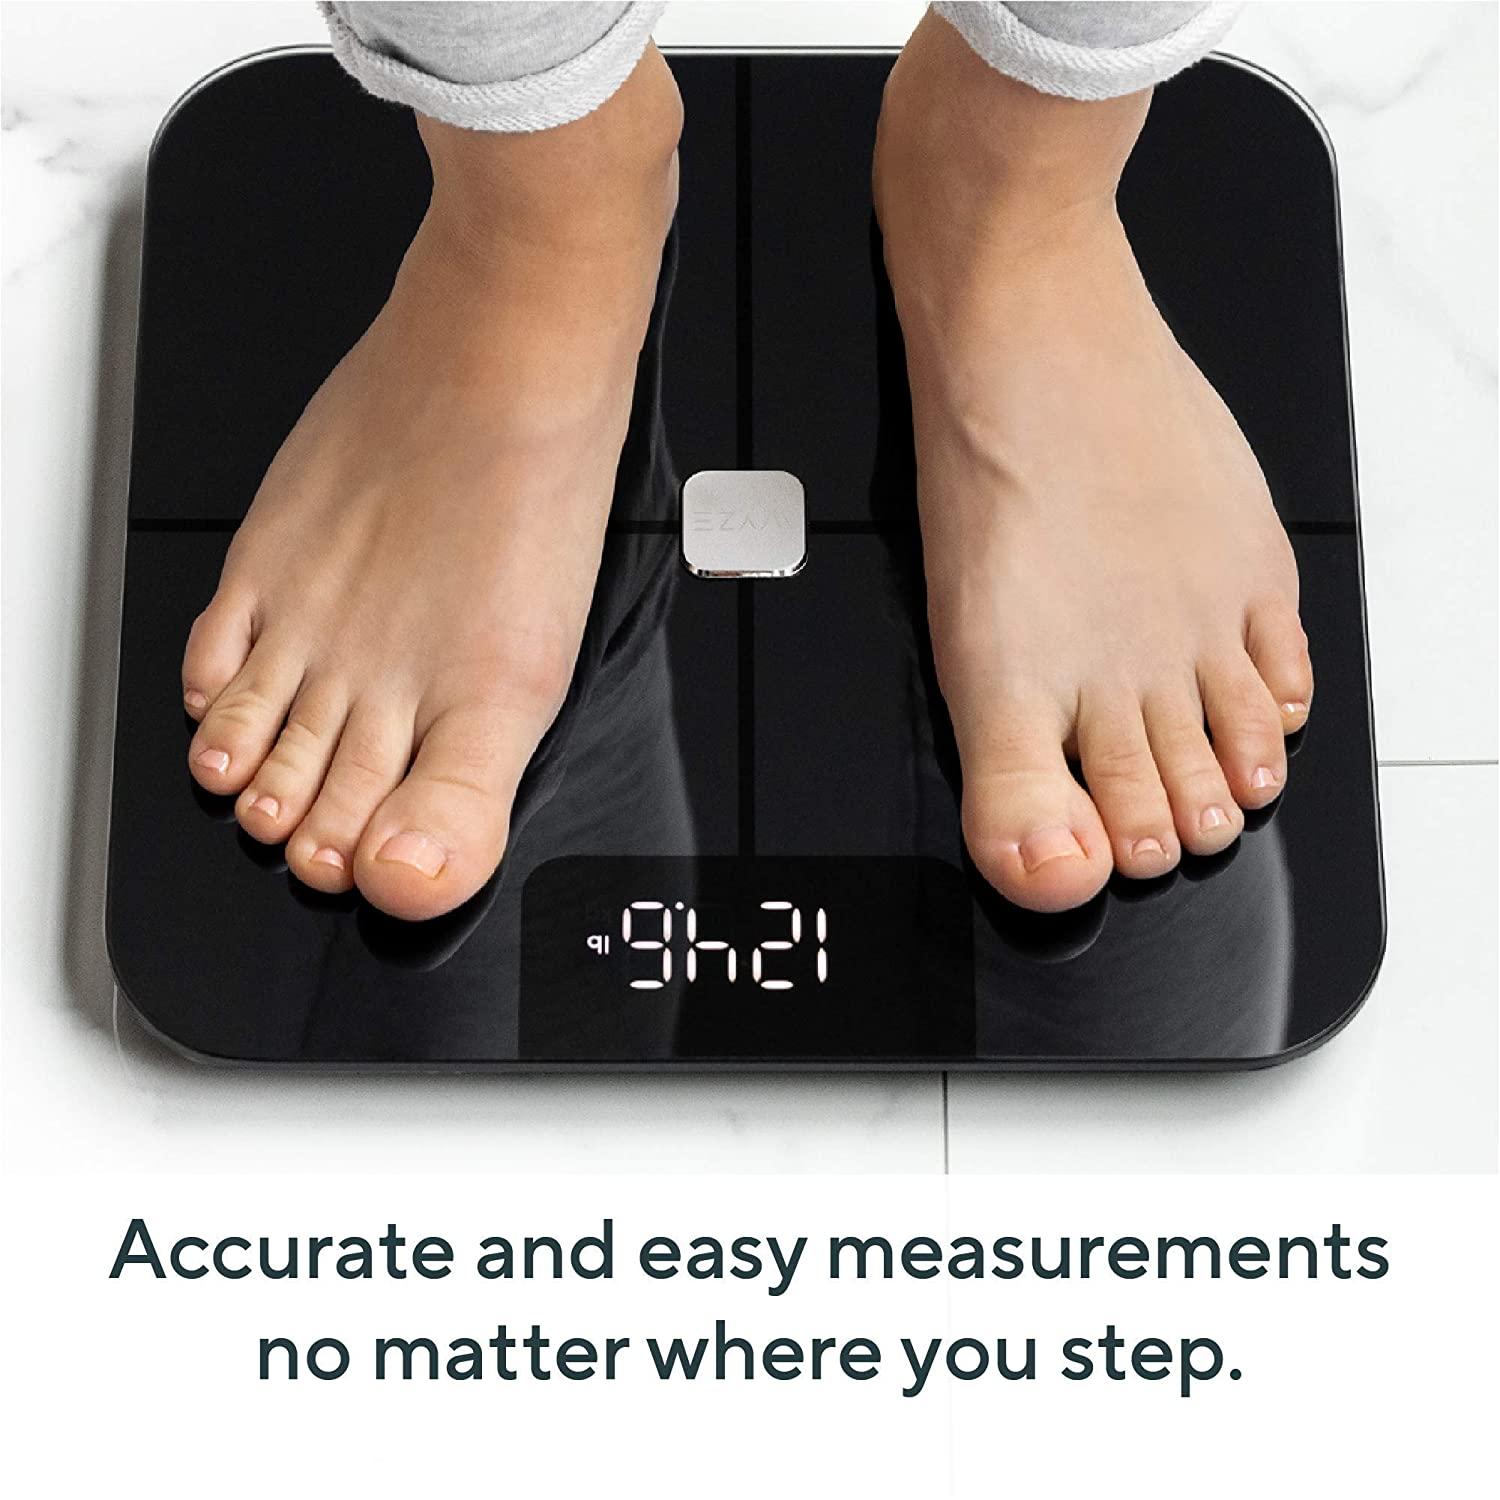 Scale Body Weight, Smart Bathroom Weight with Fat Percentage BLACK